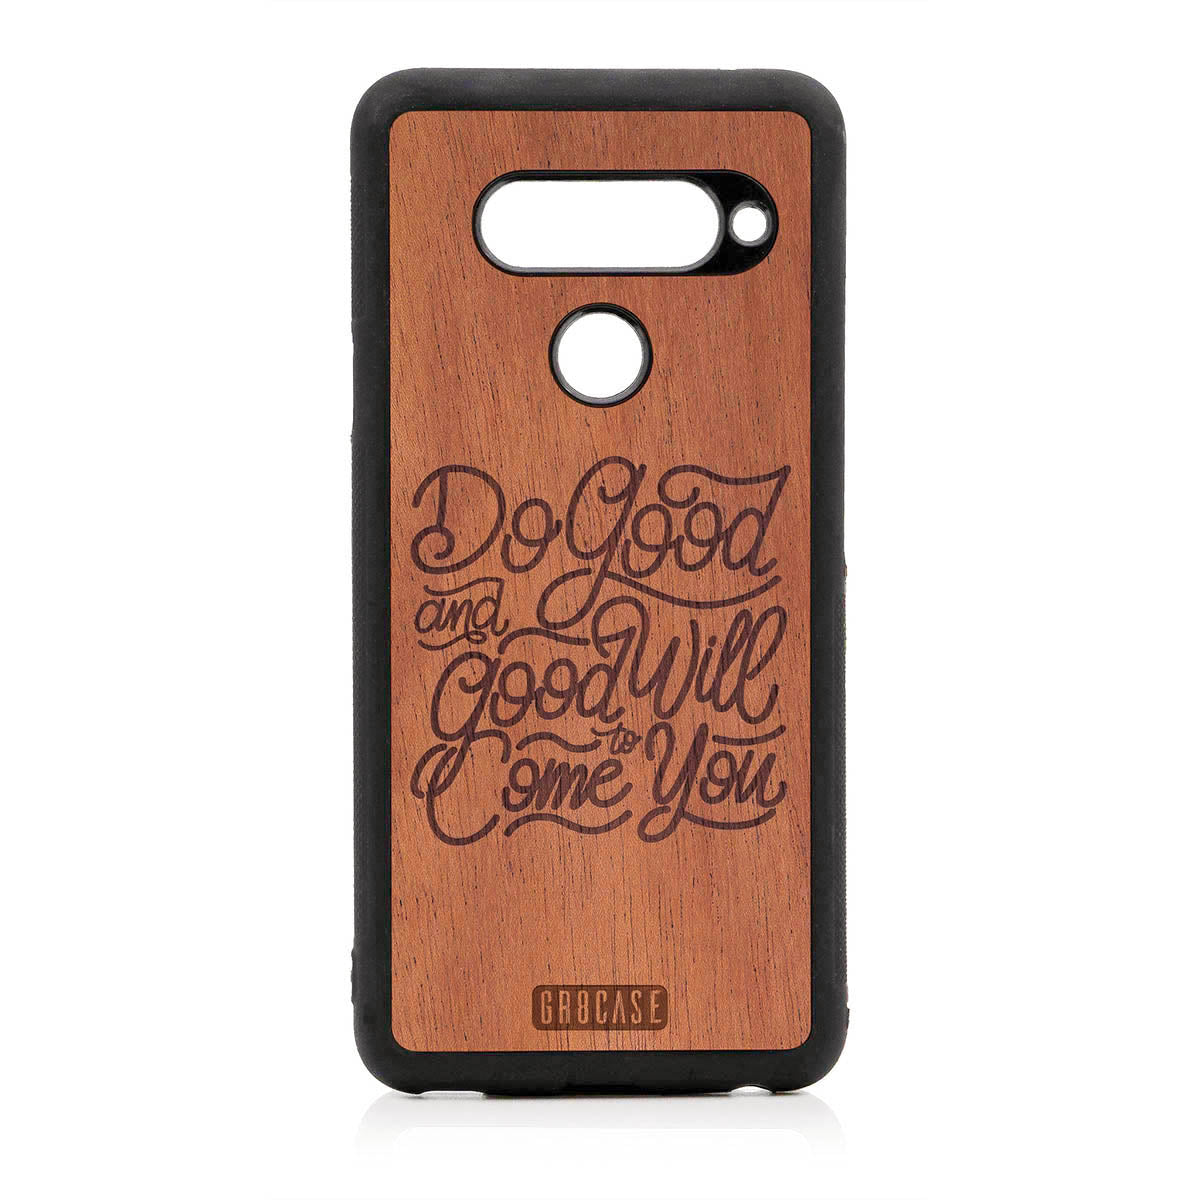 Do Good And Good Will Come To You Design Wood Case For LG V40 by GR8CASE